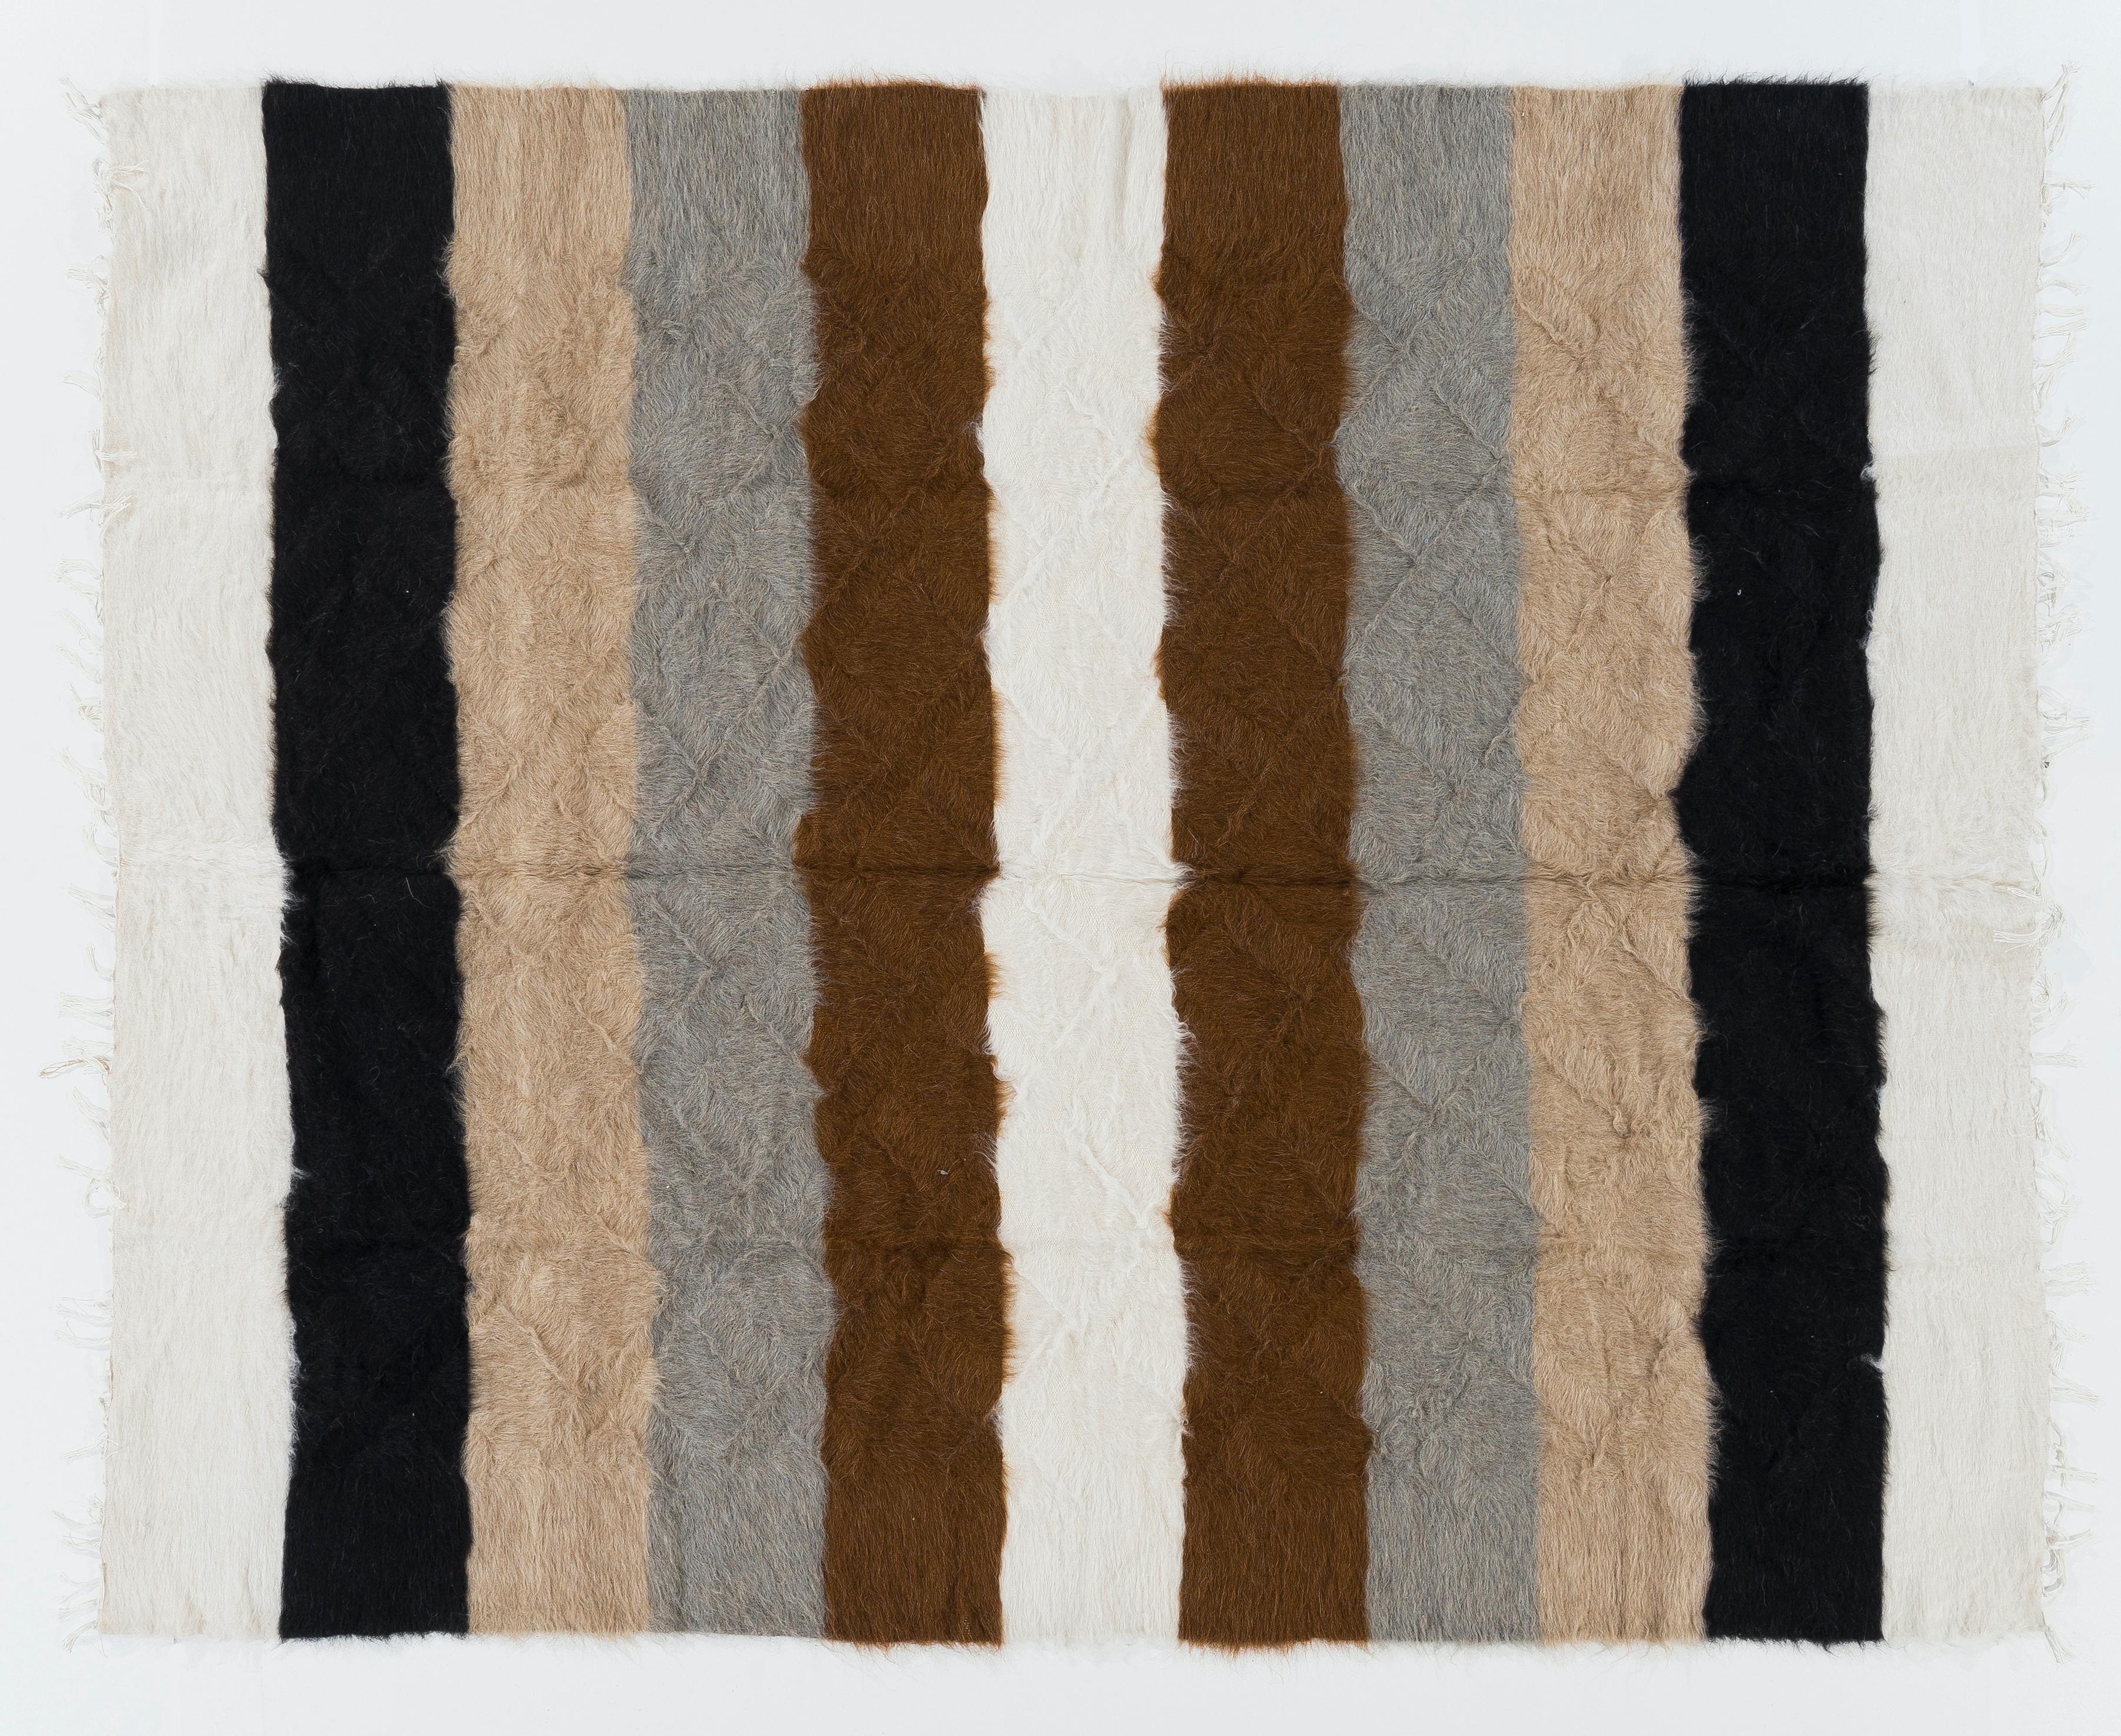 A handwoven flat-weave rug from Eastern Turkey. It is made of soft Undyed Natural Mohair wool and loosely woven compared to traditional Kilims therefore it is very soft and floppy. Measures 6 x 7.4 Ft
It can be used as a blanket, a bed cover, sofa